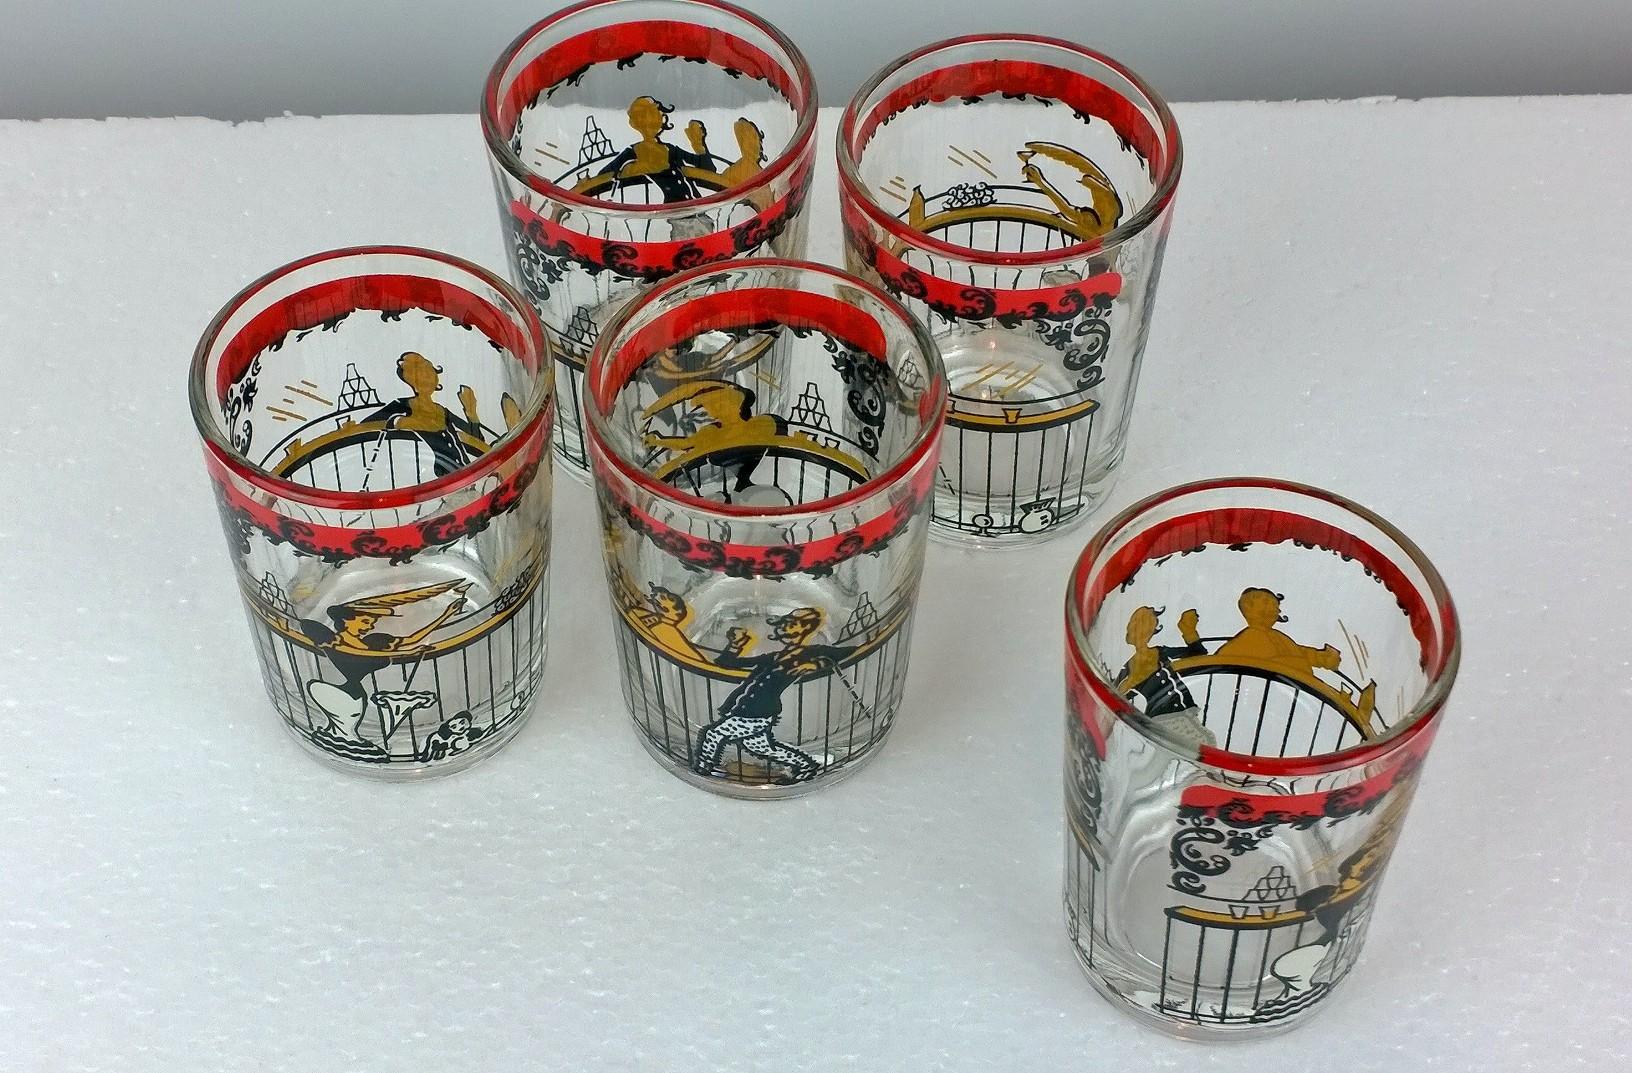 Set of 11 Red, Black & Gold Moulin Rouge Theme Overlay Cocktail Glasses & Shaker For Sale 1